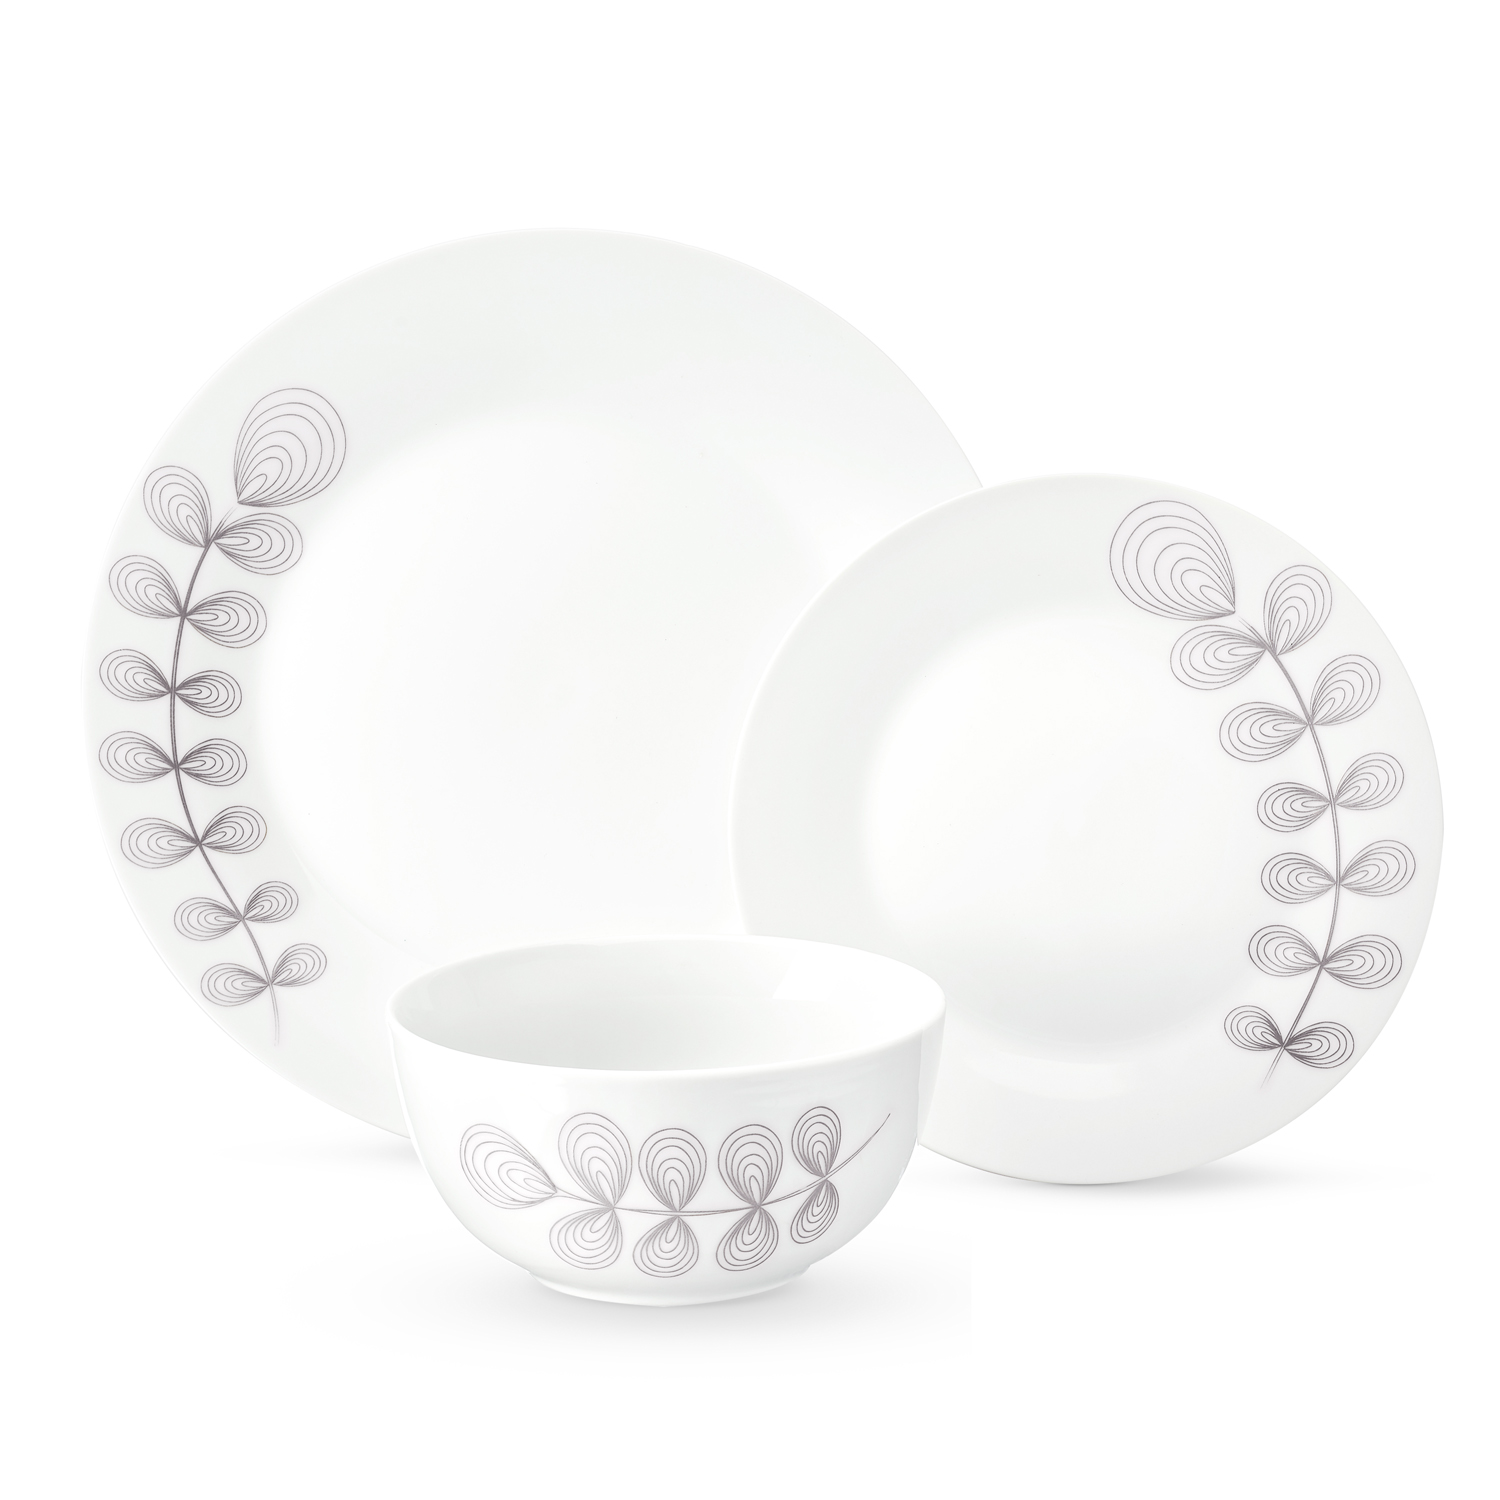 April Floral Collection Taupe 12-Piece Porcelain Dinnerware Set, Walmart Exclusive - image 2 of 5